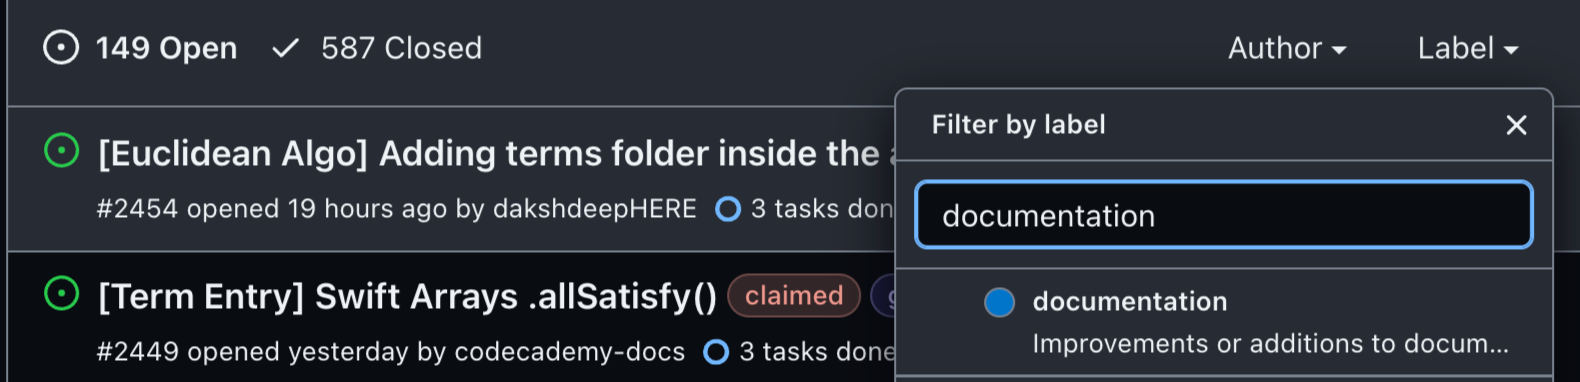 The word "documentation" appears in the textbox 